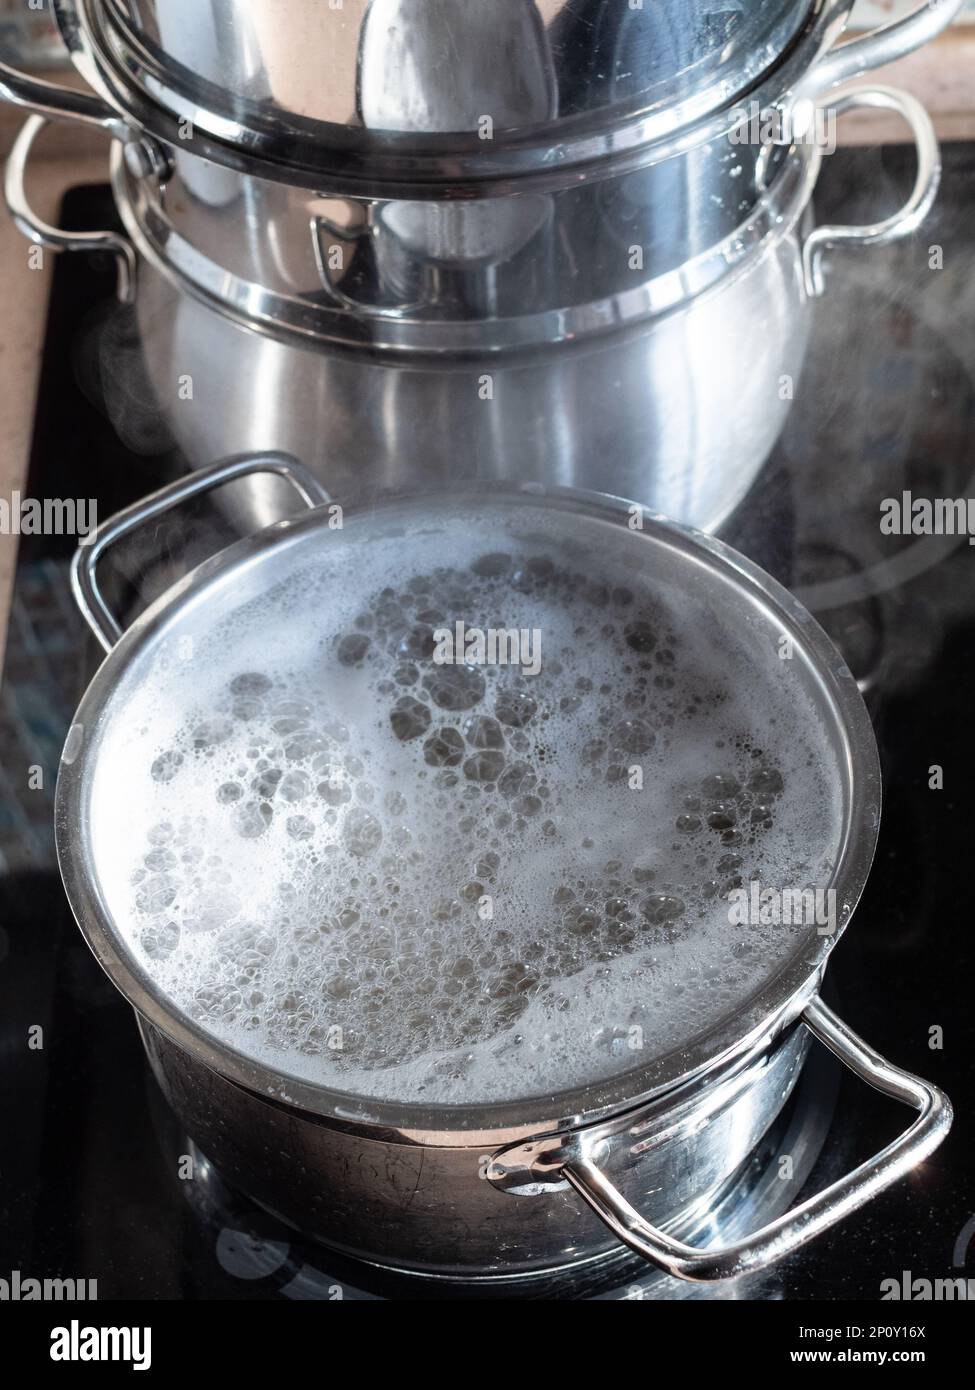 https://c8.alamy.com/comp/2P0Y16X/water-boils-in-saucepan-on-ceramic-stove-in-home-kitchen-2P0Y16X.jpg